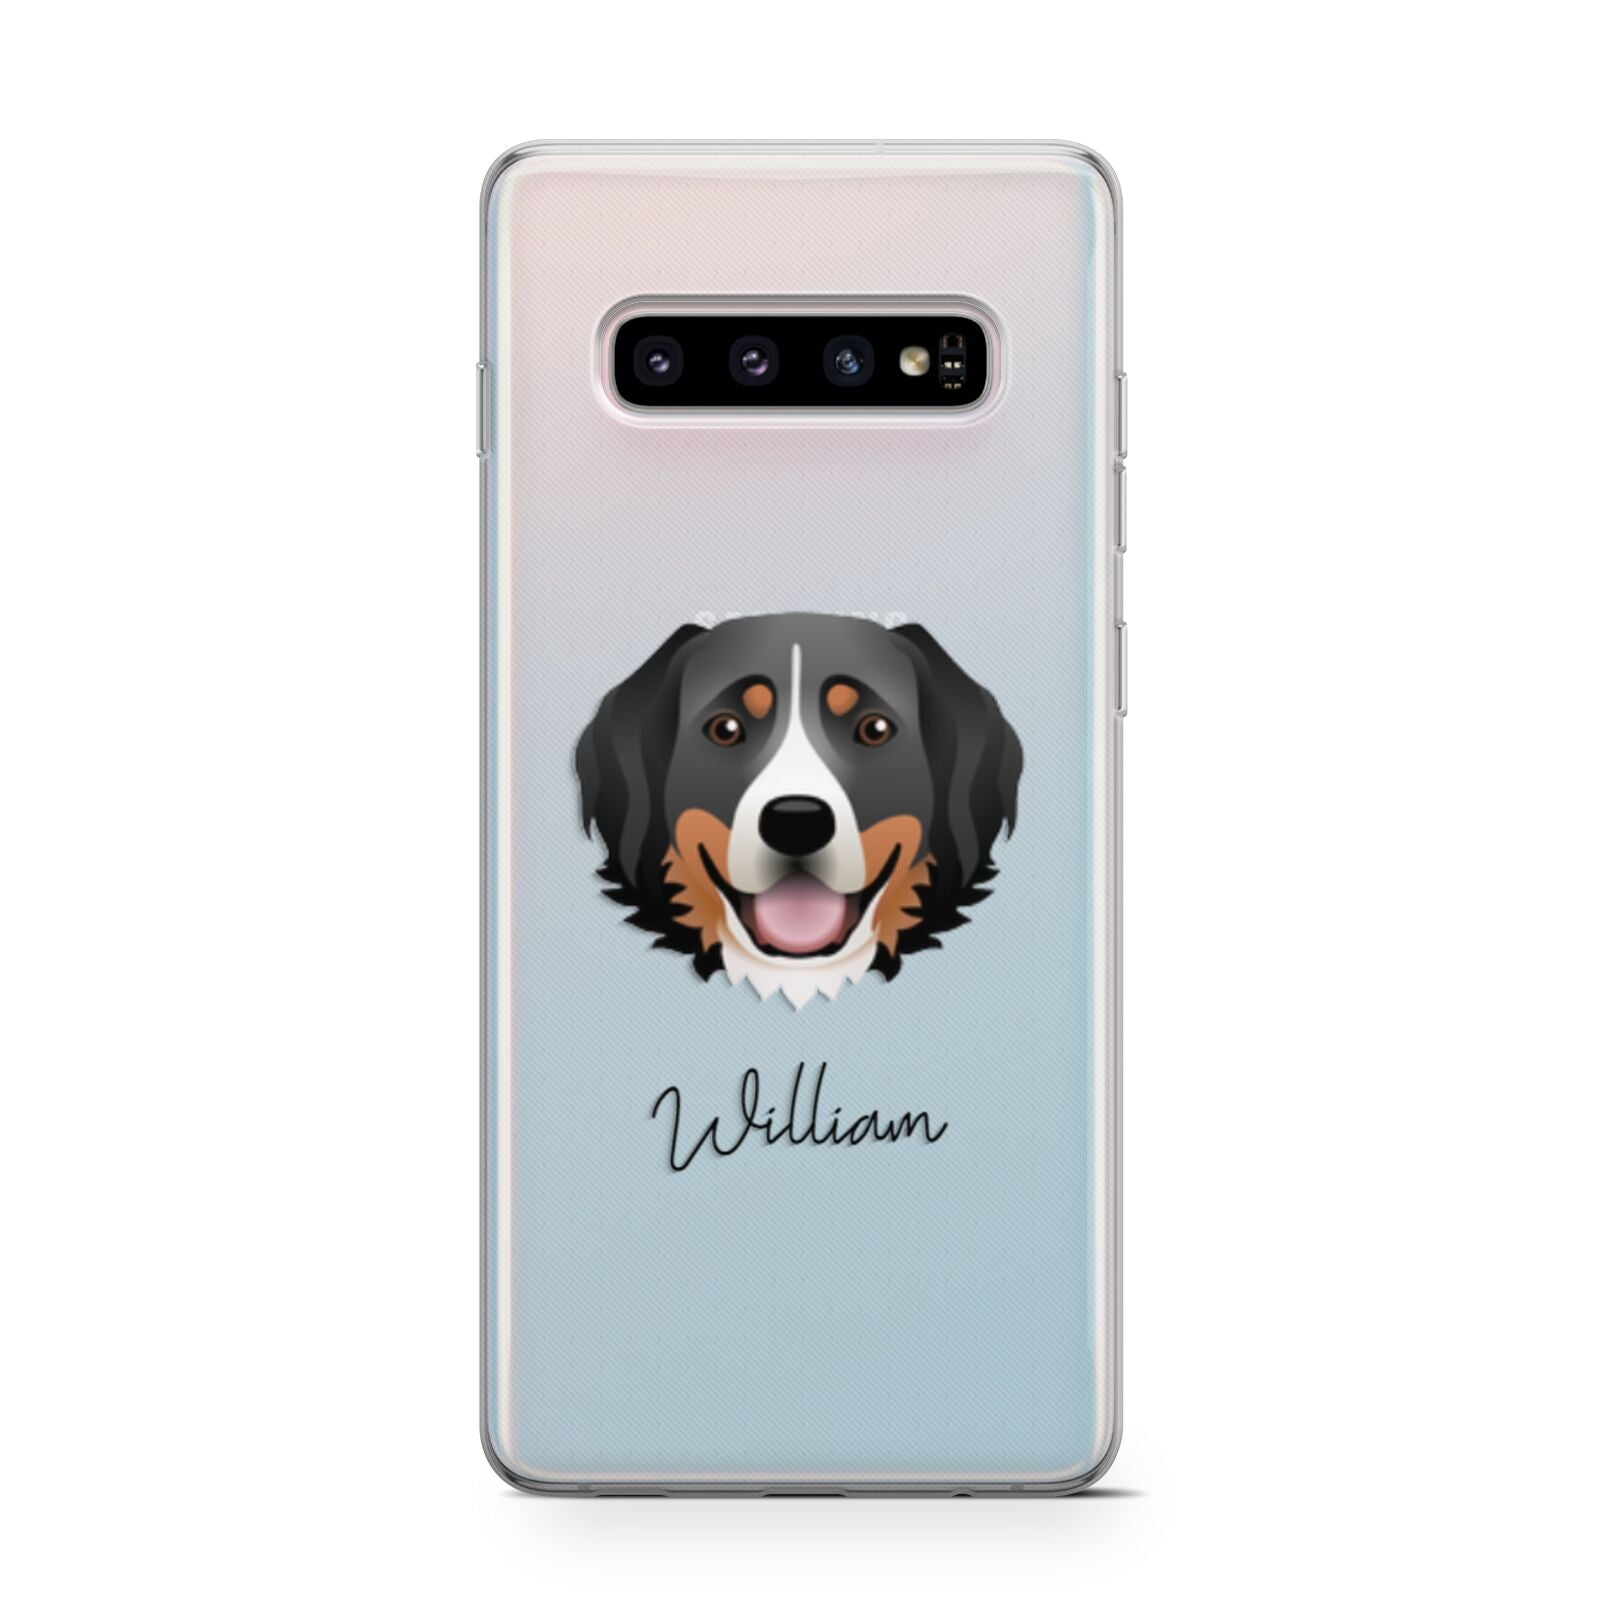 Bernese Mountain Dog Personalised Samsung Galaxy S10 Case